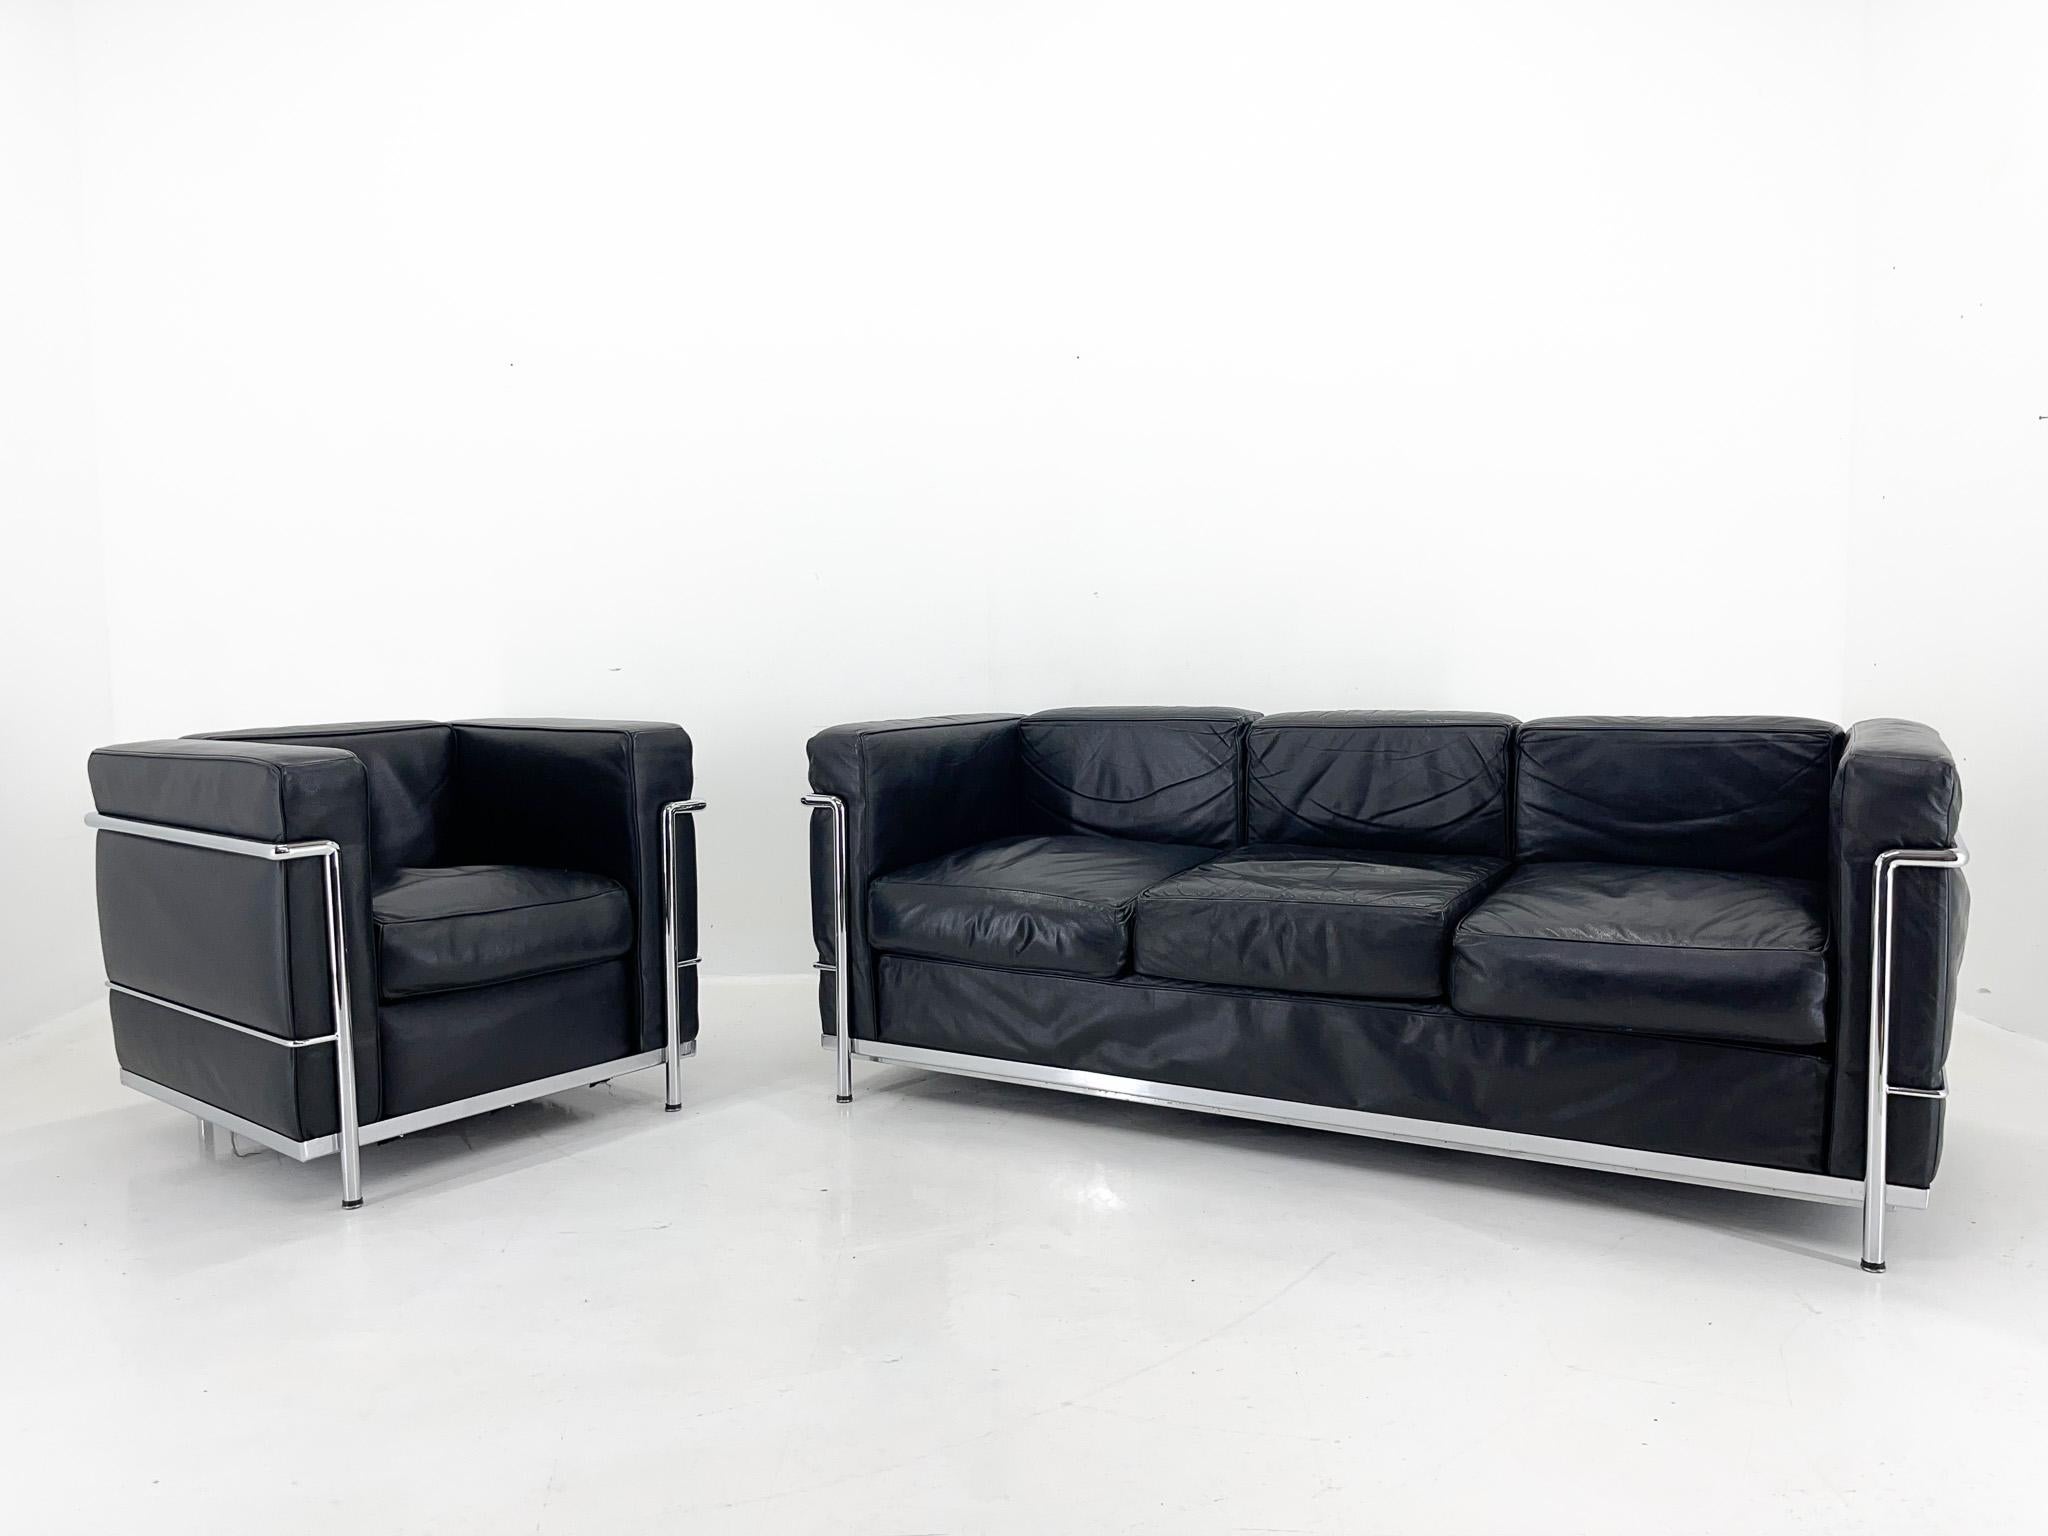 Three-seater sofa and armchair in black leather and chrome, made at the end of the 20th century. Based on the LC3 sofa designed by Le Corbusier, Pierre Jeanneret and Charlotte Perriand for Cassina. A fantastic combination of comfort and modern